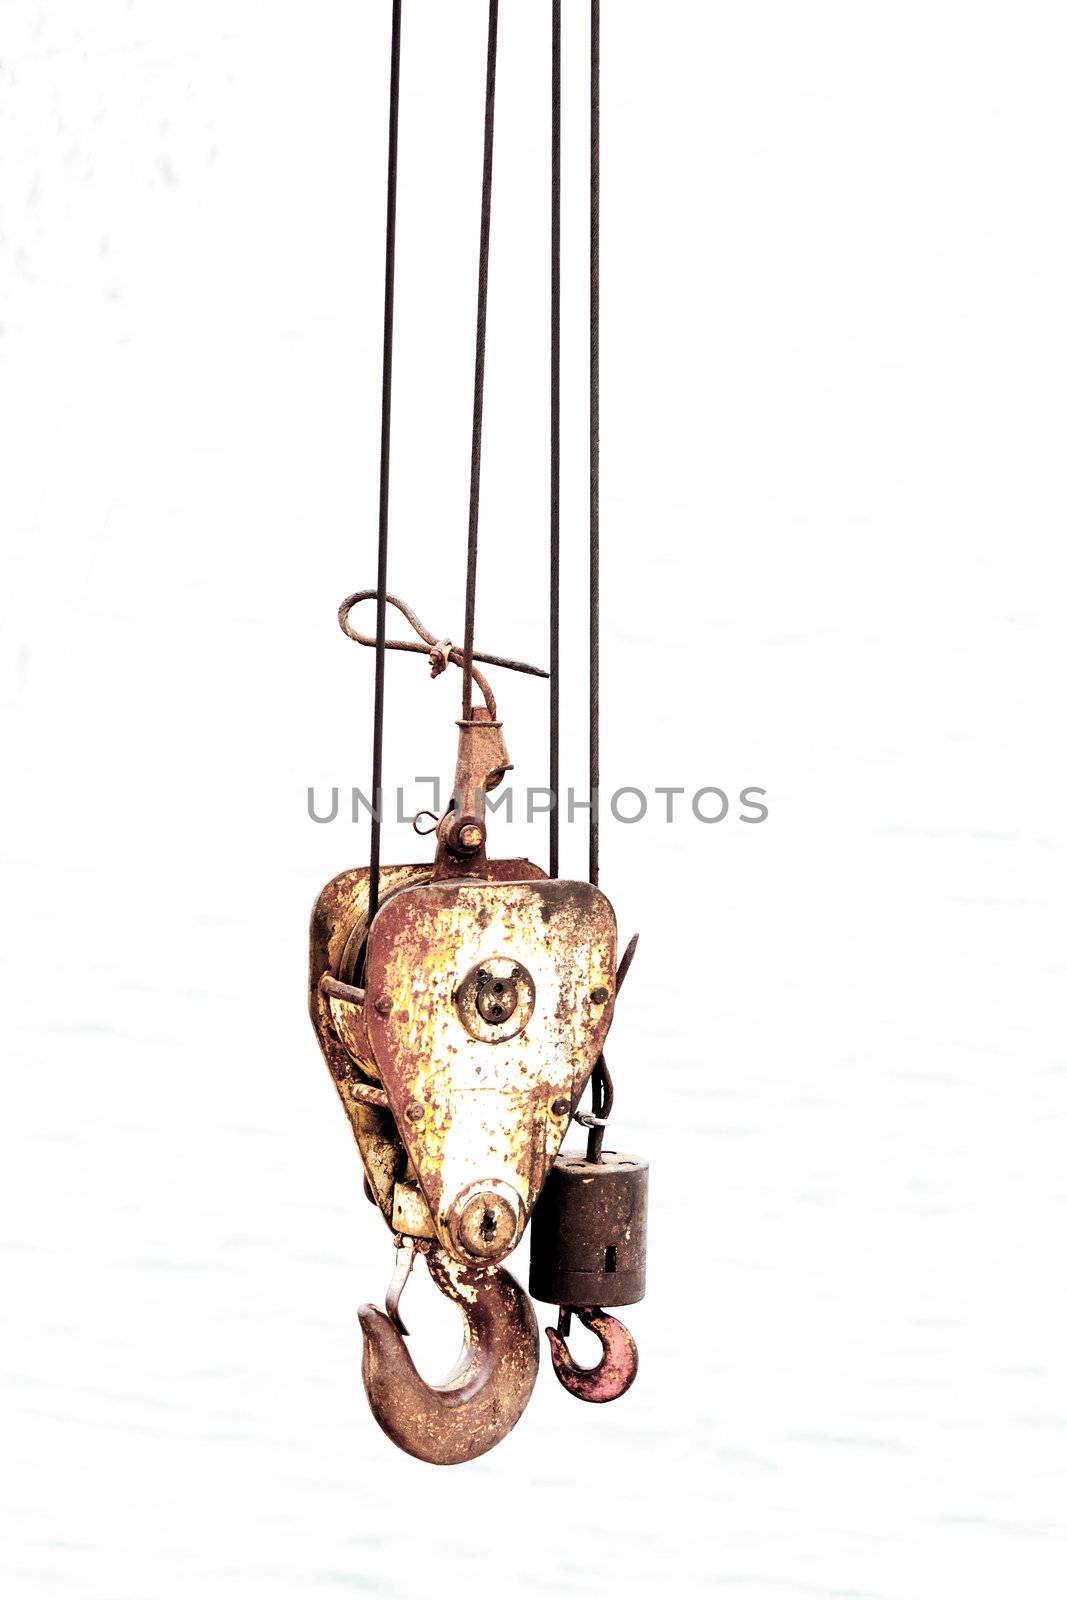 Hooks and cables for hoisting heavy loads isolated by PiLens